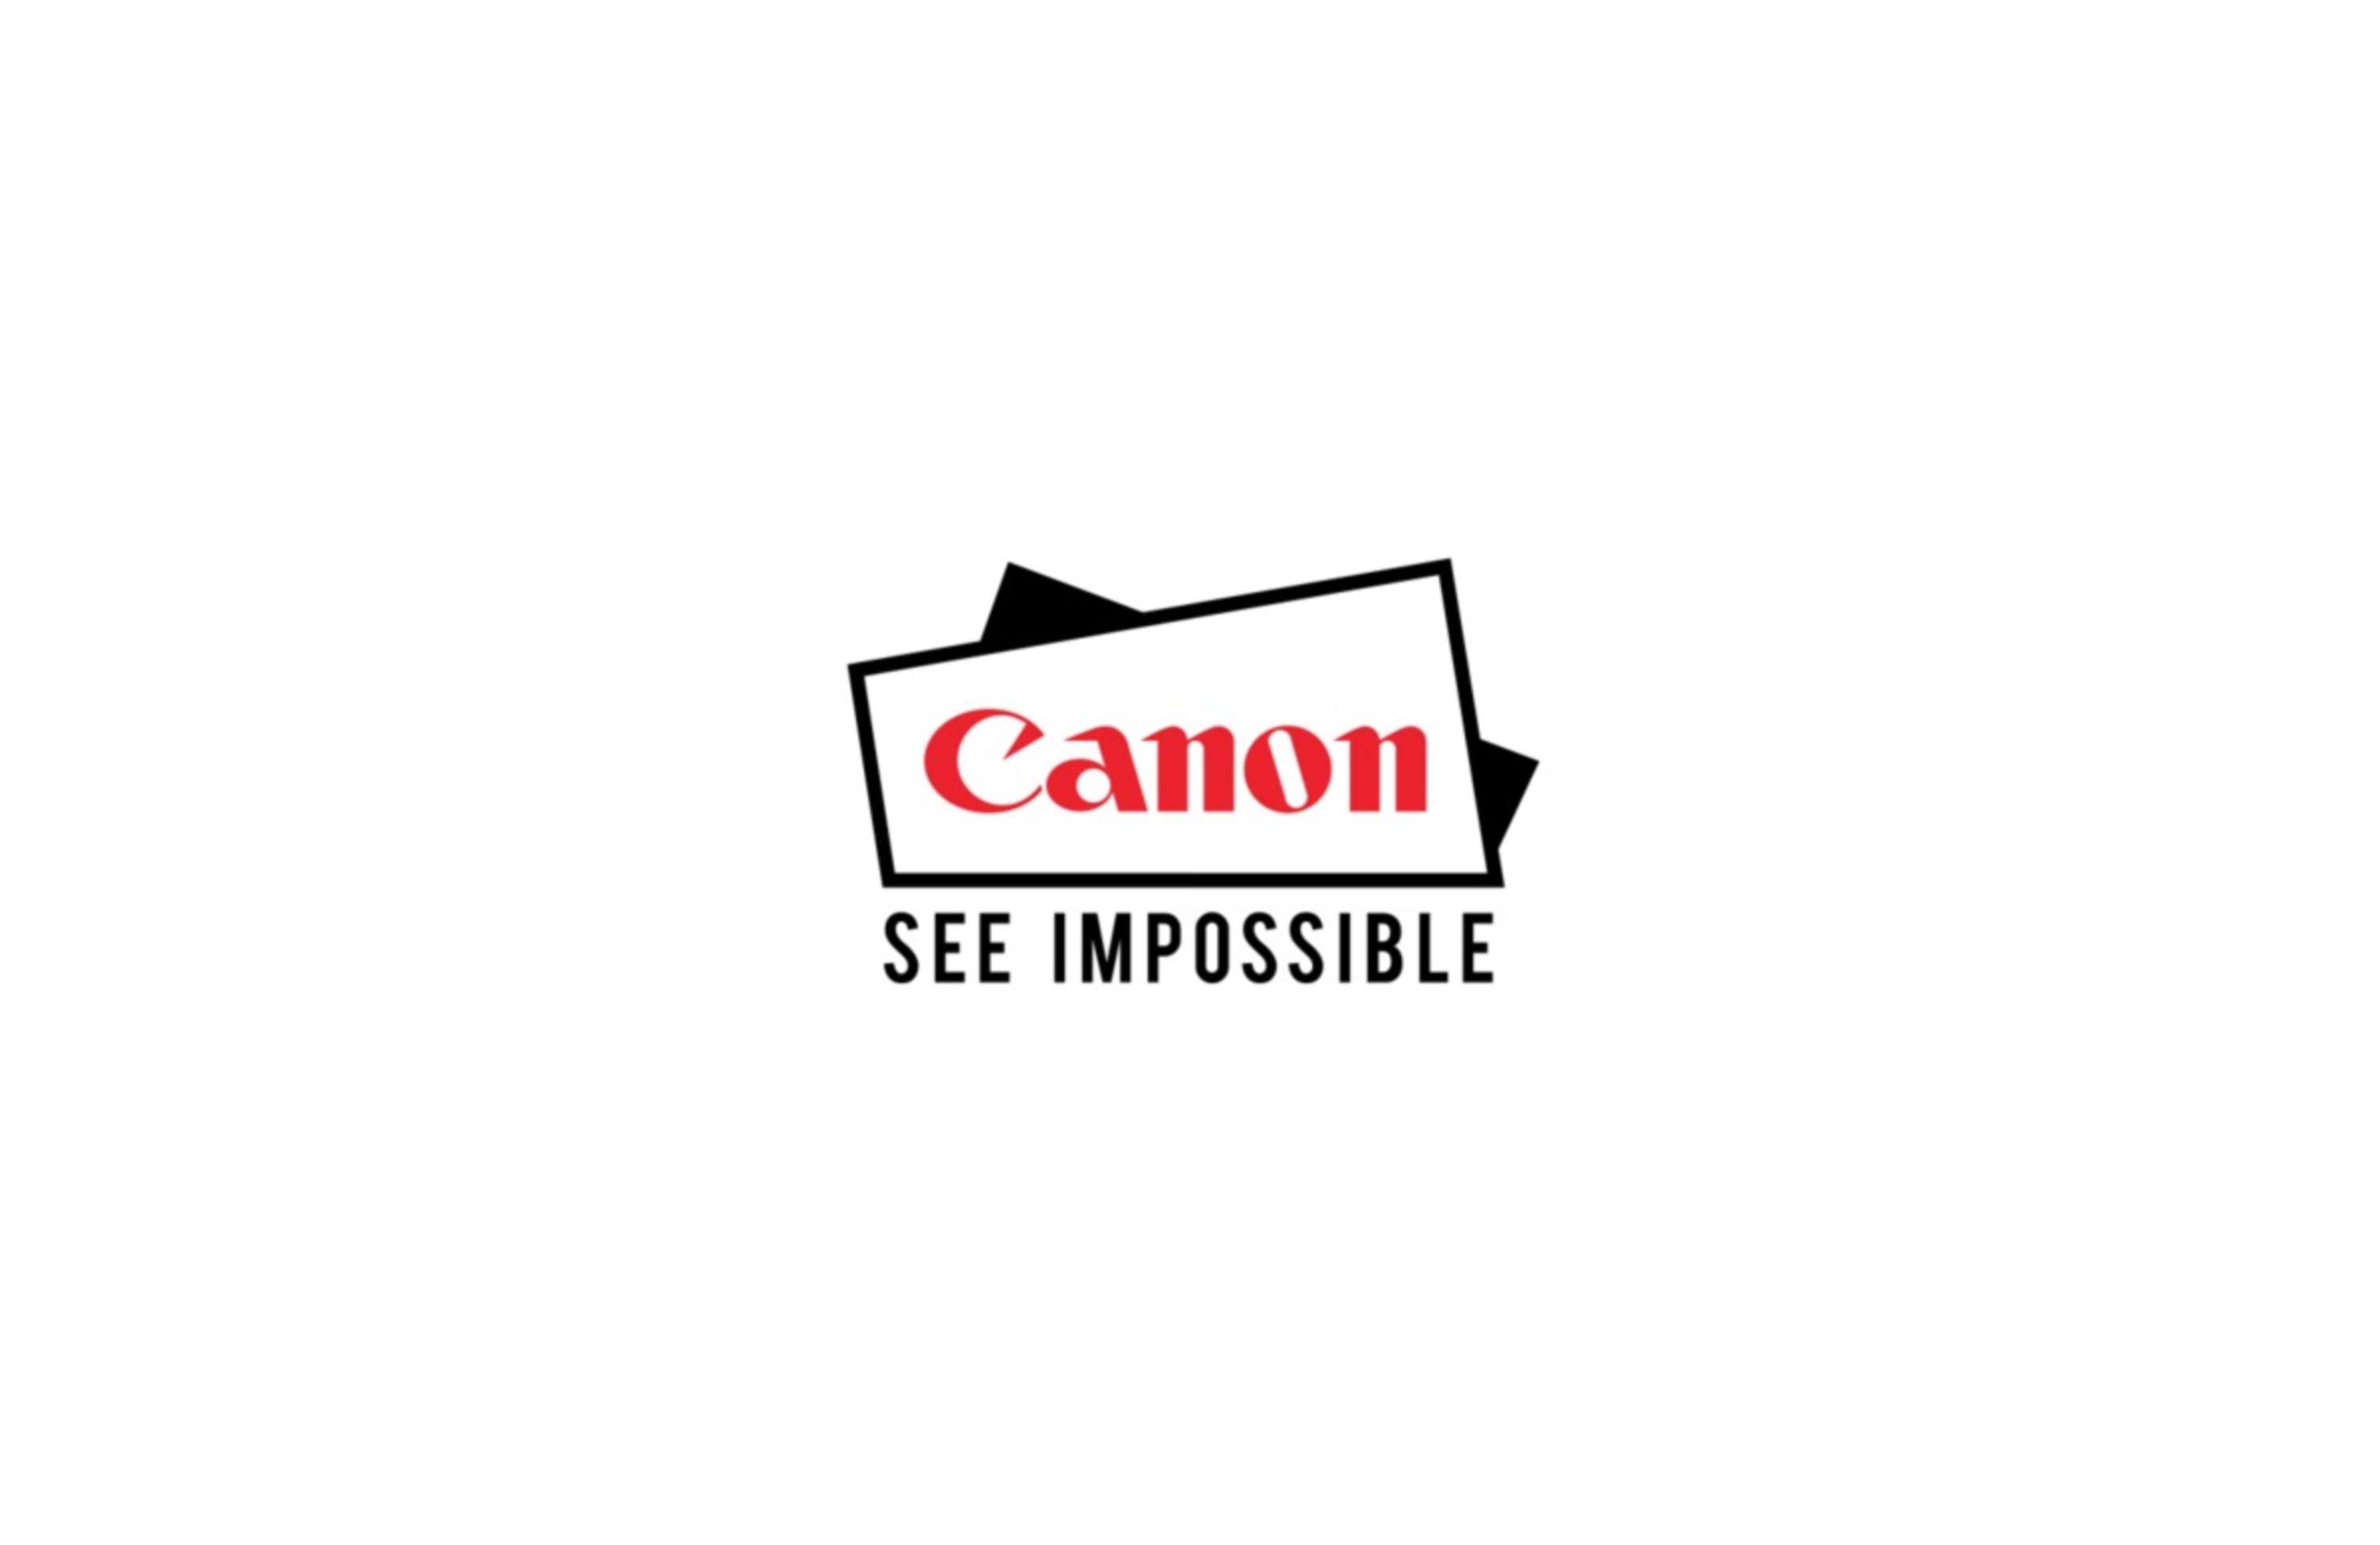 Canon See Impossible Logo - PITCHING : Canon Logo Design | The Dots